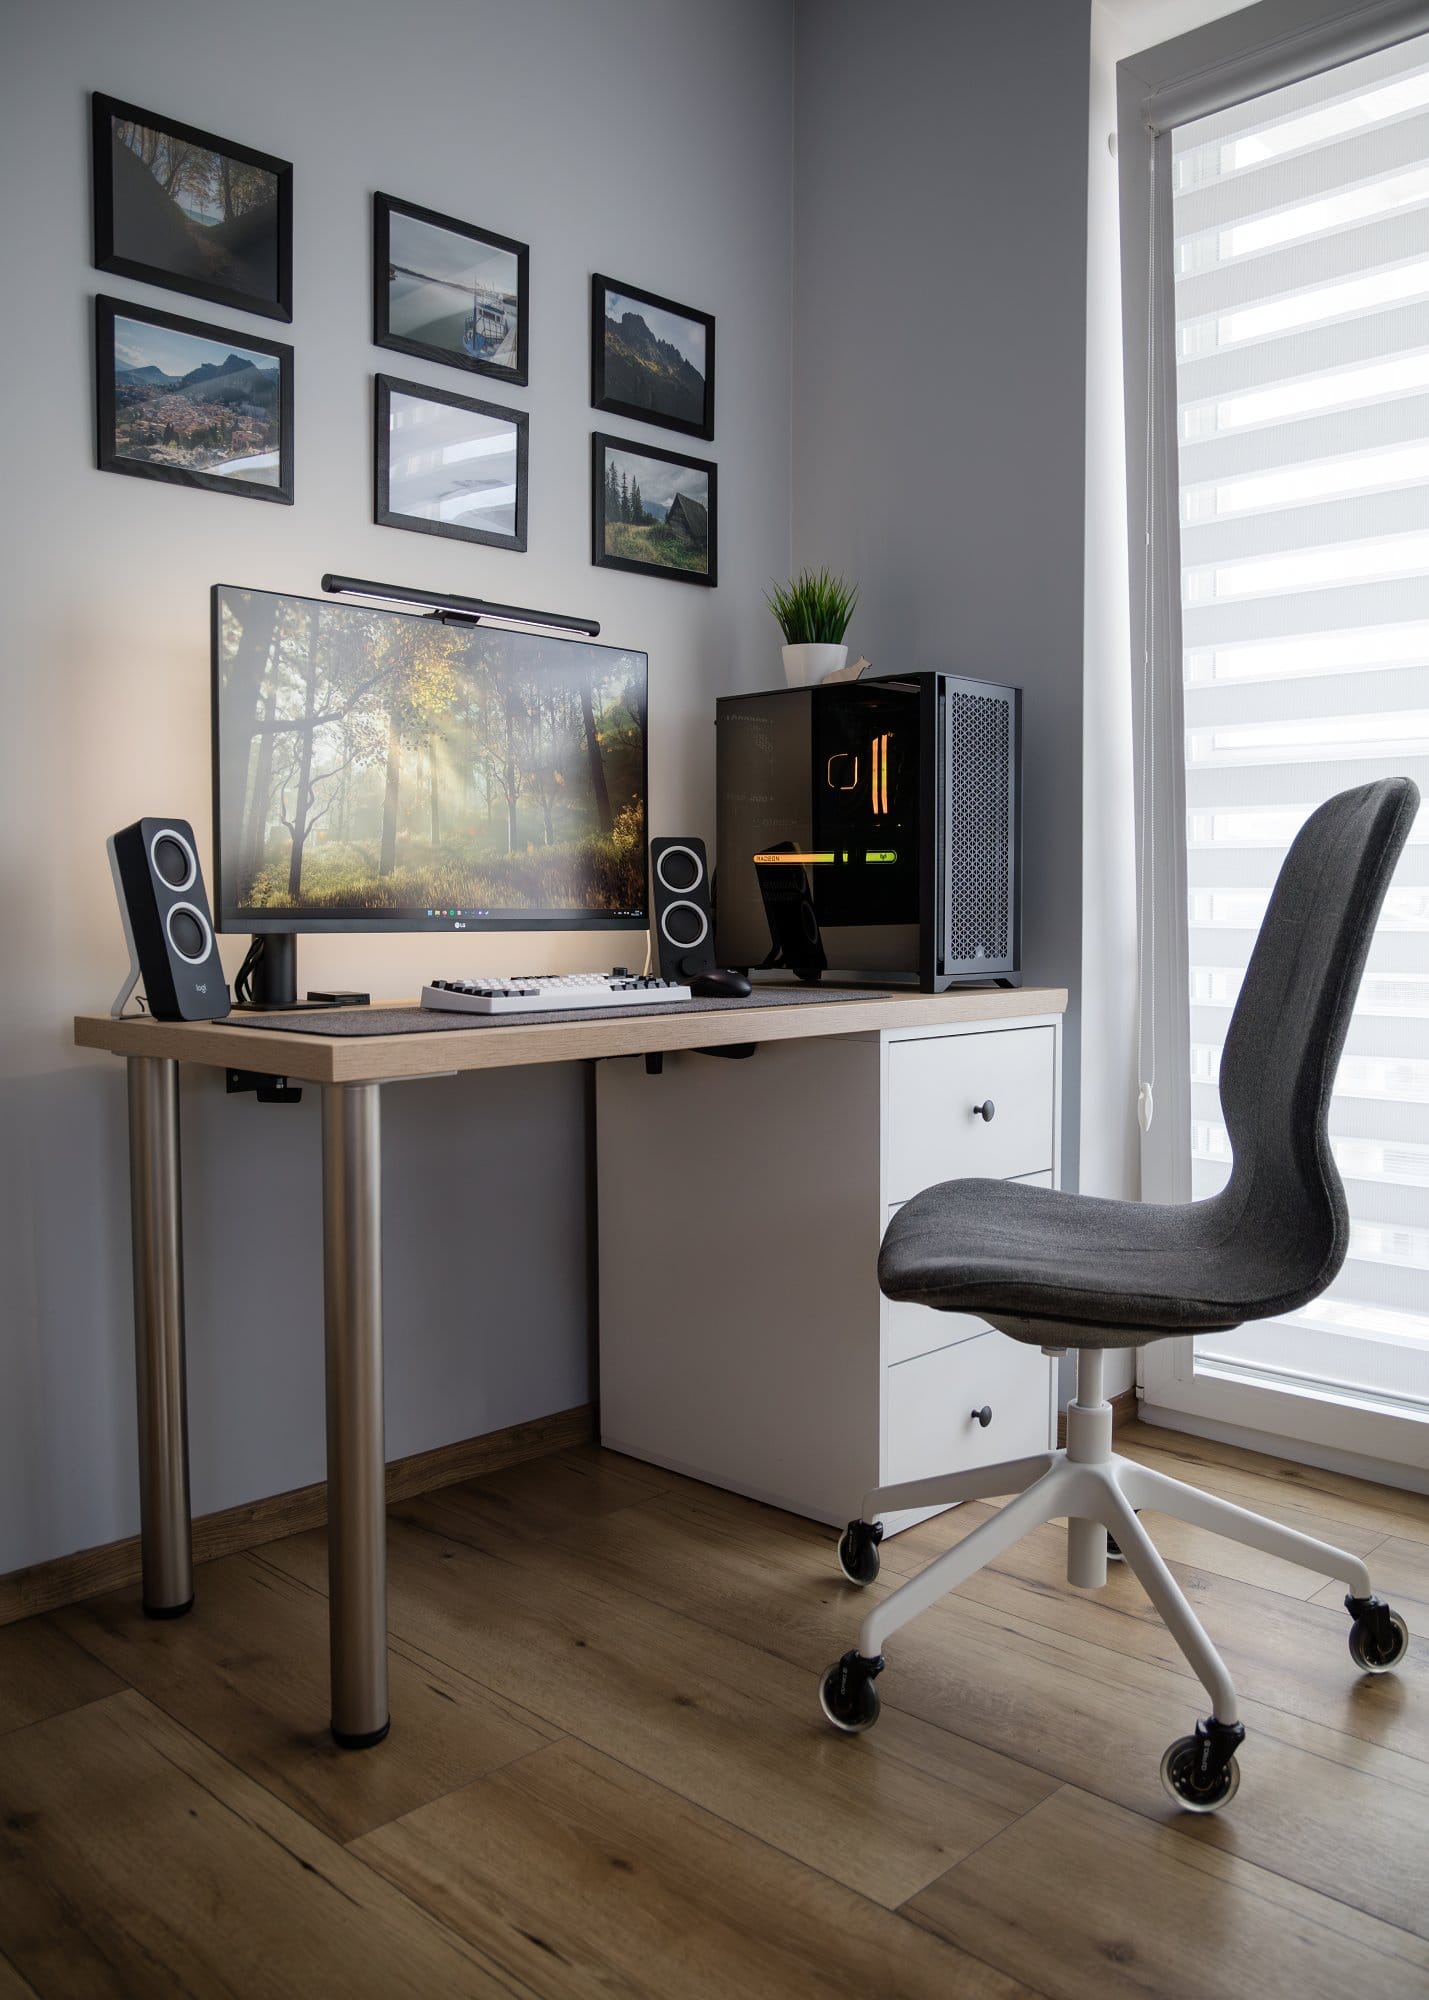 A contemporary home office setup with a corner desk, an ultra-wide monitor, speakers, a computer with illuminated elements, a grey IKEA swivel chair, and a backdrop of framed landscape photos